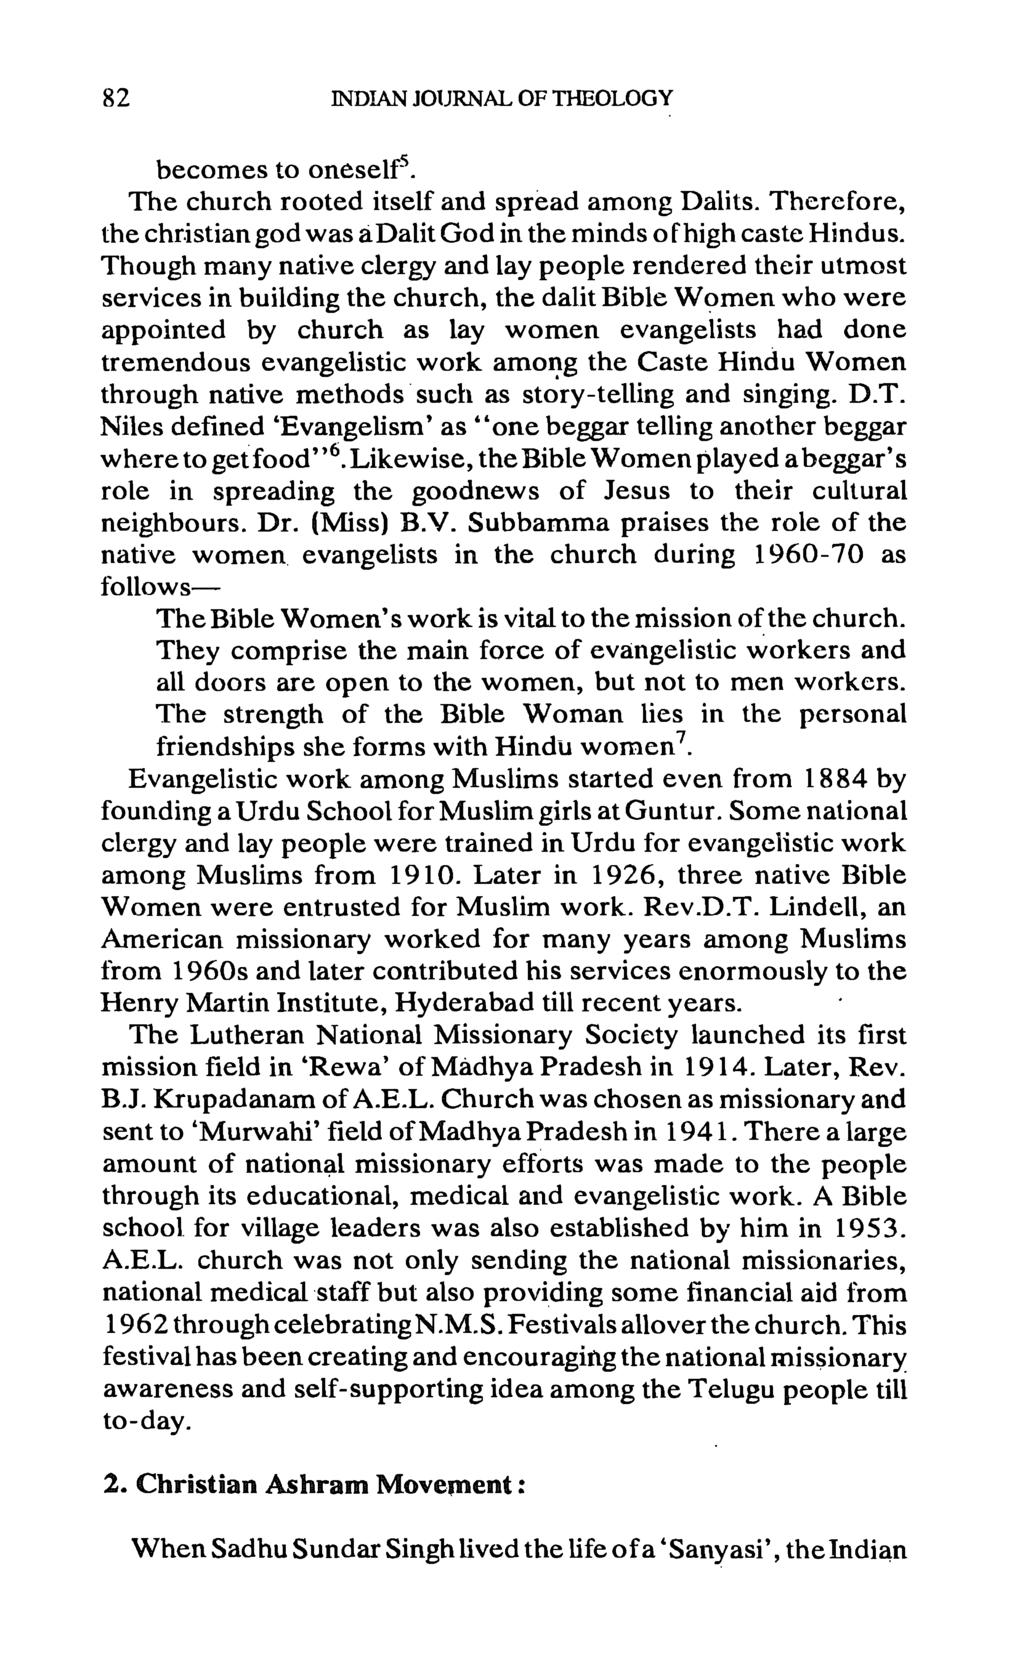 82 INDIAN JOURNAL OF THEOLOGY becomes to oneself 5. The church rooted itself and spread among Dalits. Therefore, the chr.istian god was ad alit God in the minds of high caste Hindus.